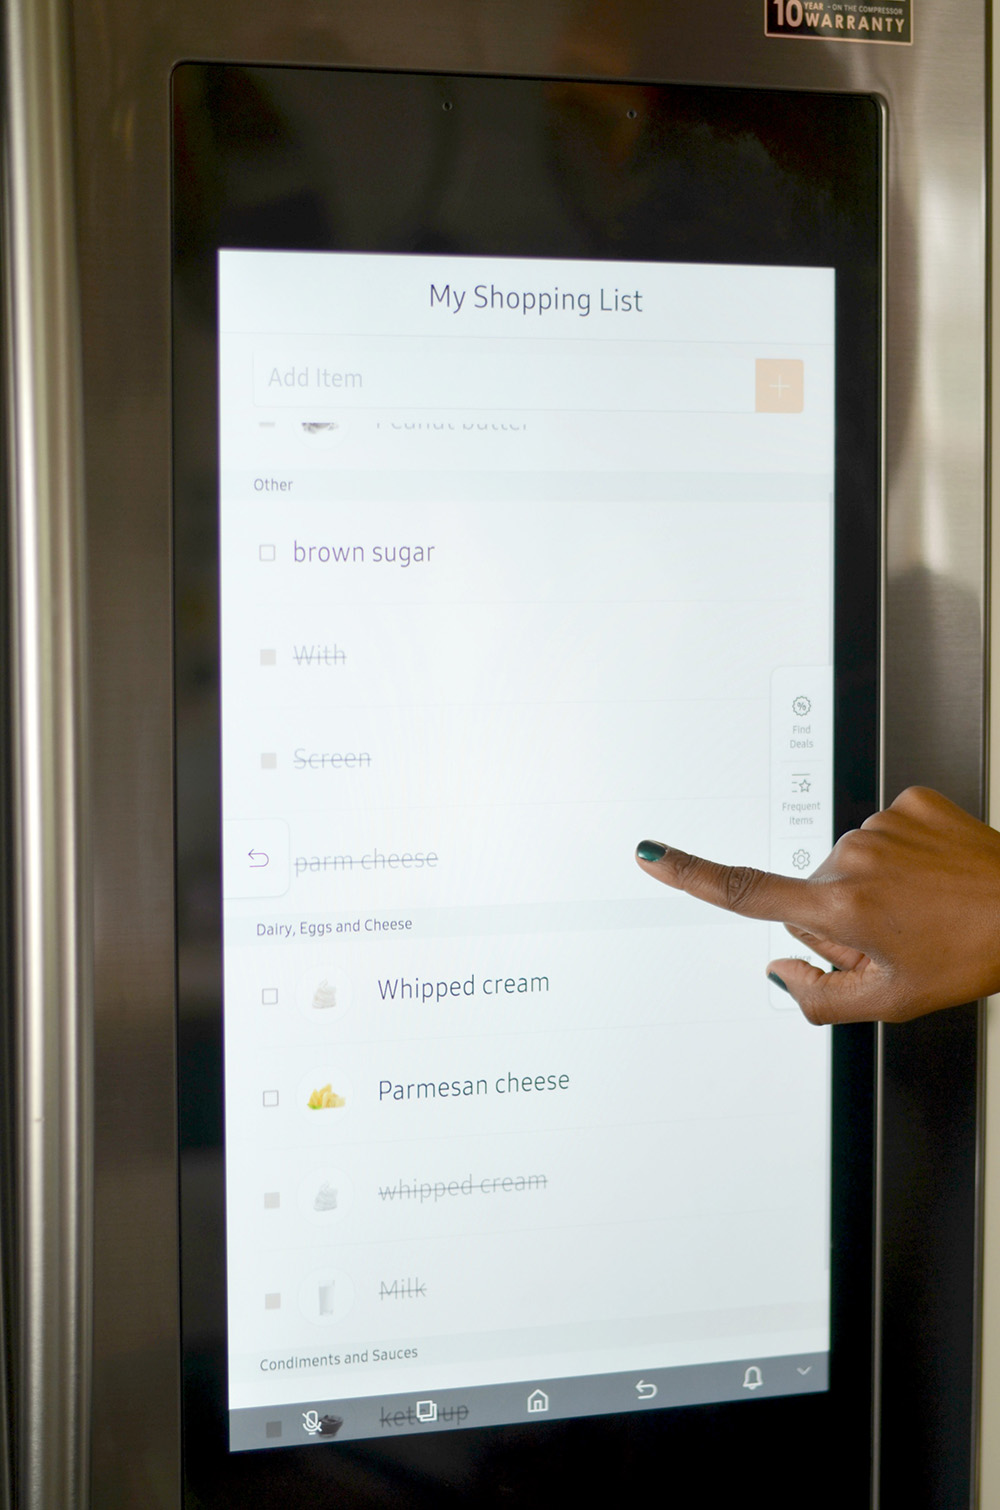 A person creates a shopping list on the screen of a smart refrigerator.